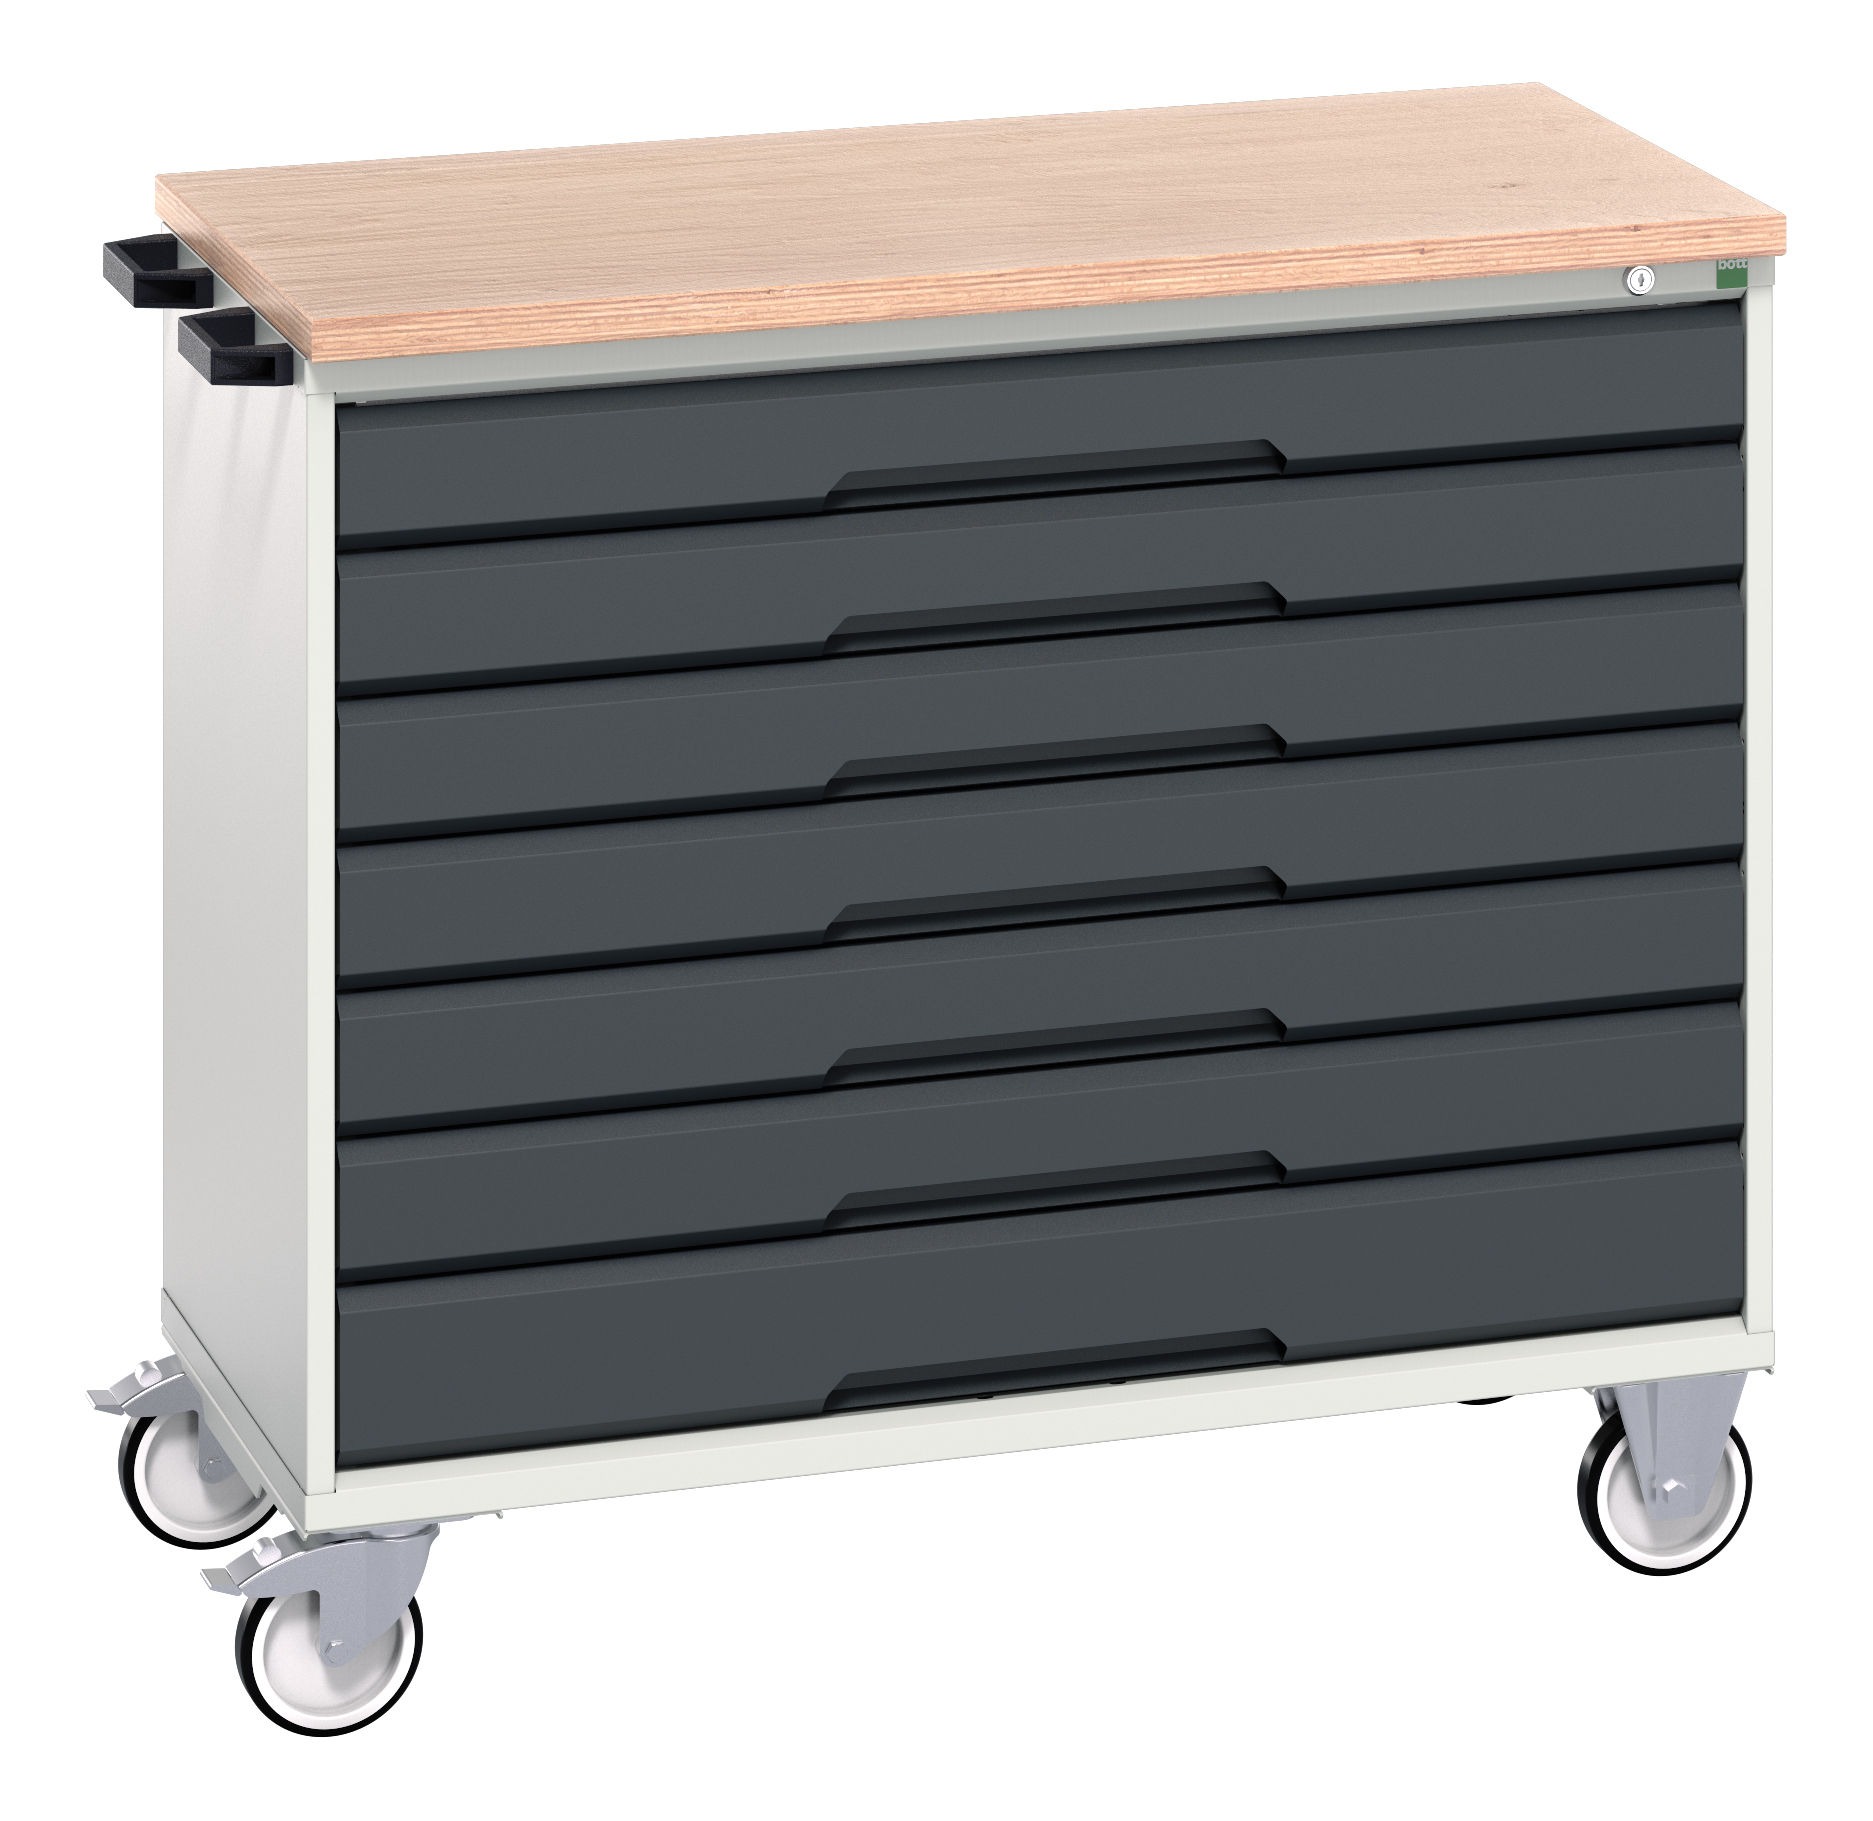 Bott Verso Mobile Drawer Cabinet With 7 Drawers & Multiplex Top - 16927057.19